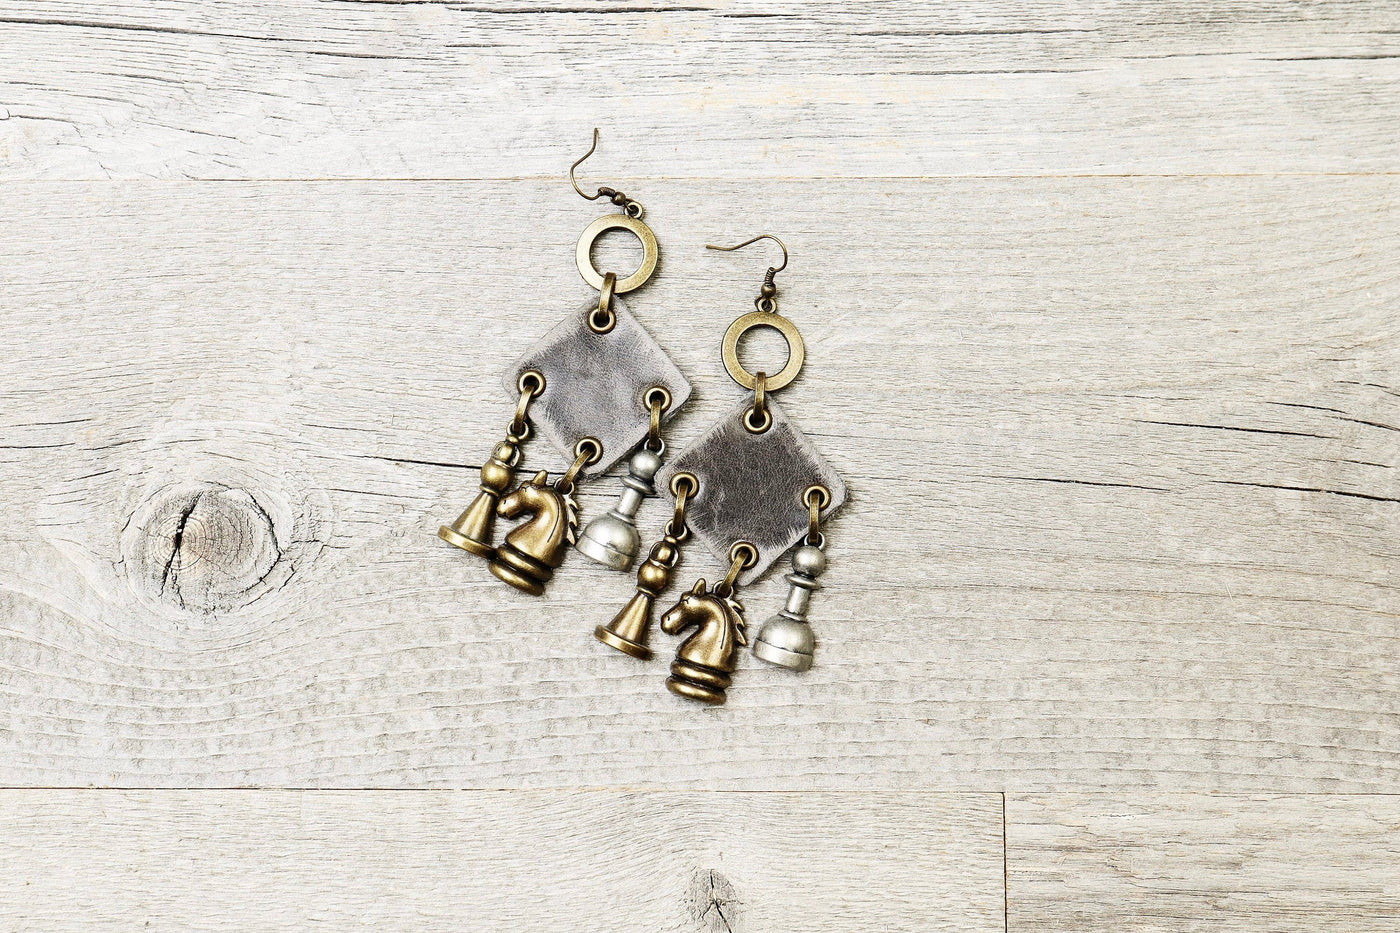 Chess Piece Leather Boho Earrings - Knight Bishop Pawn Horse Game Statement Gray Smart Gift for Her Square Unique Bohemian Handmade Jewelry